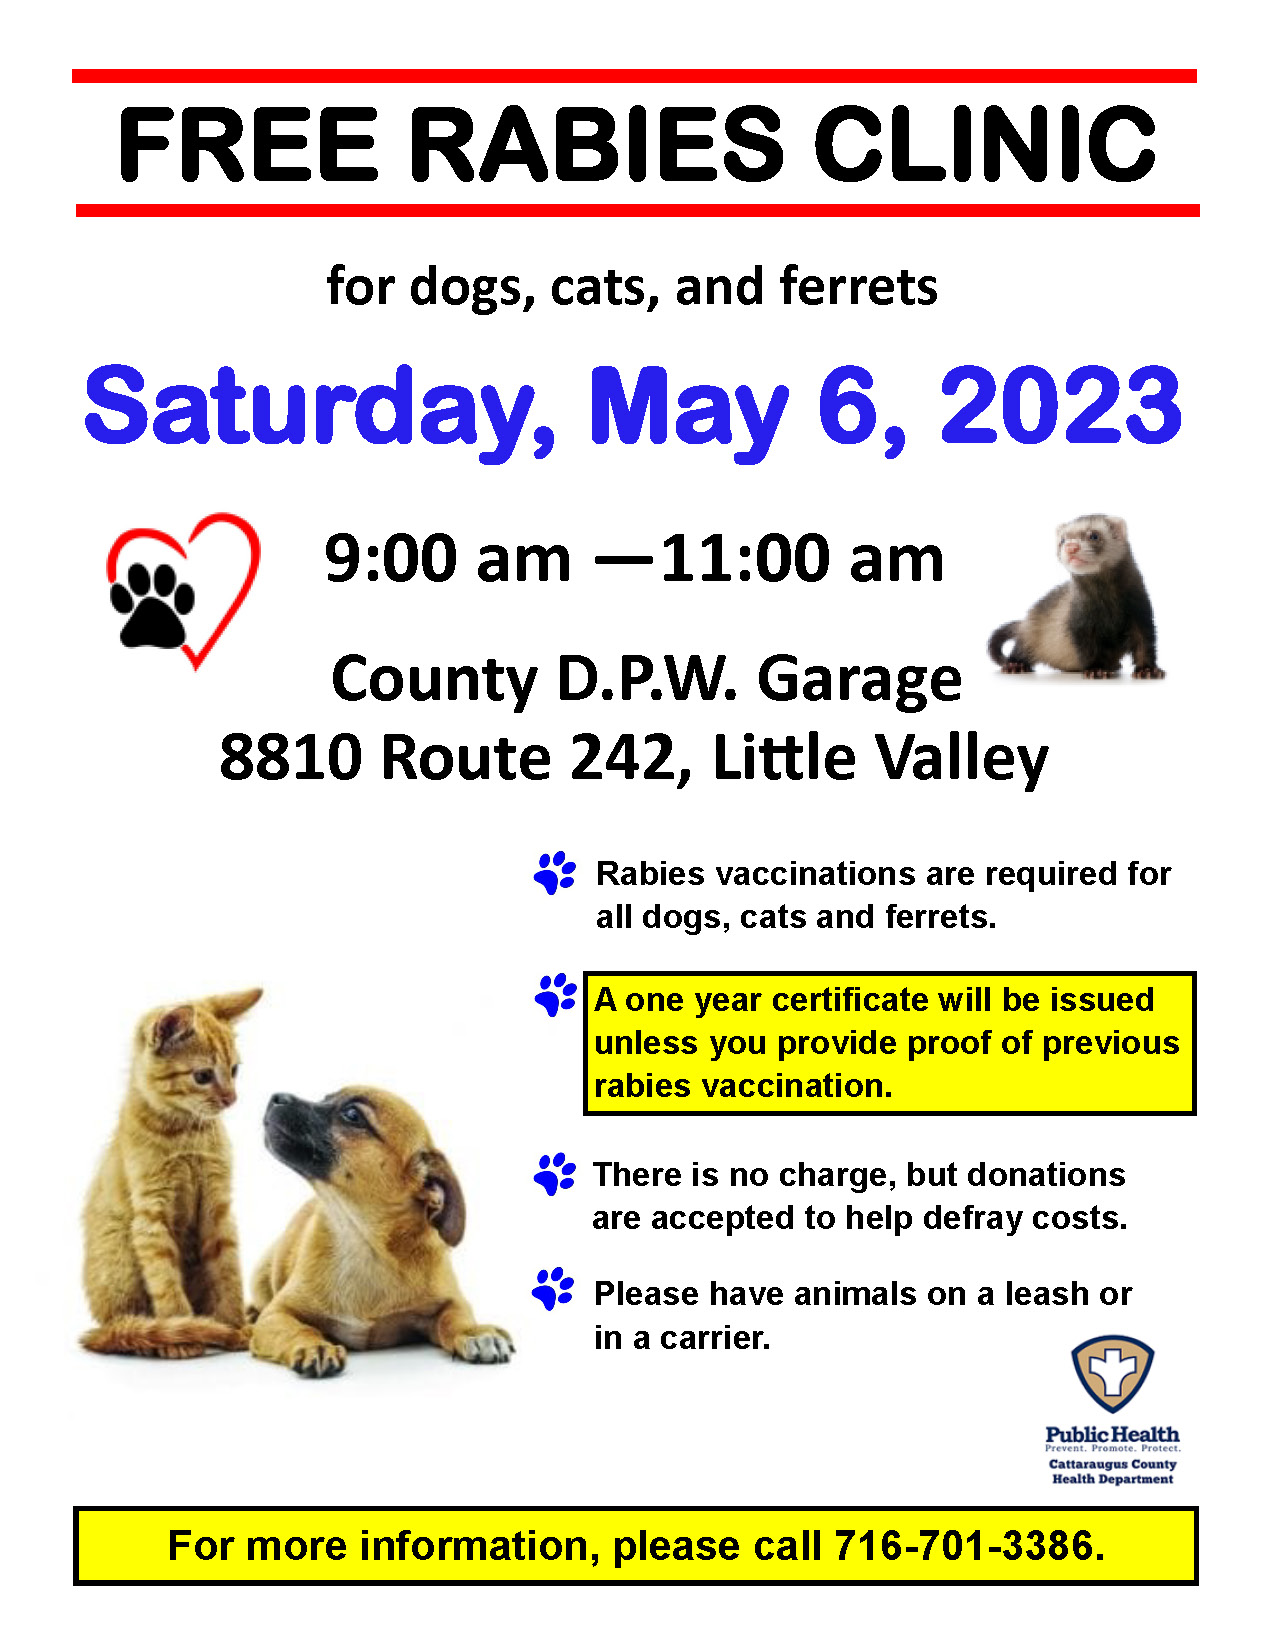 Rabies Clinic flyer for May 6, 2023